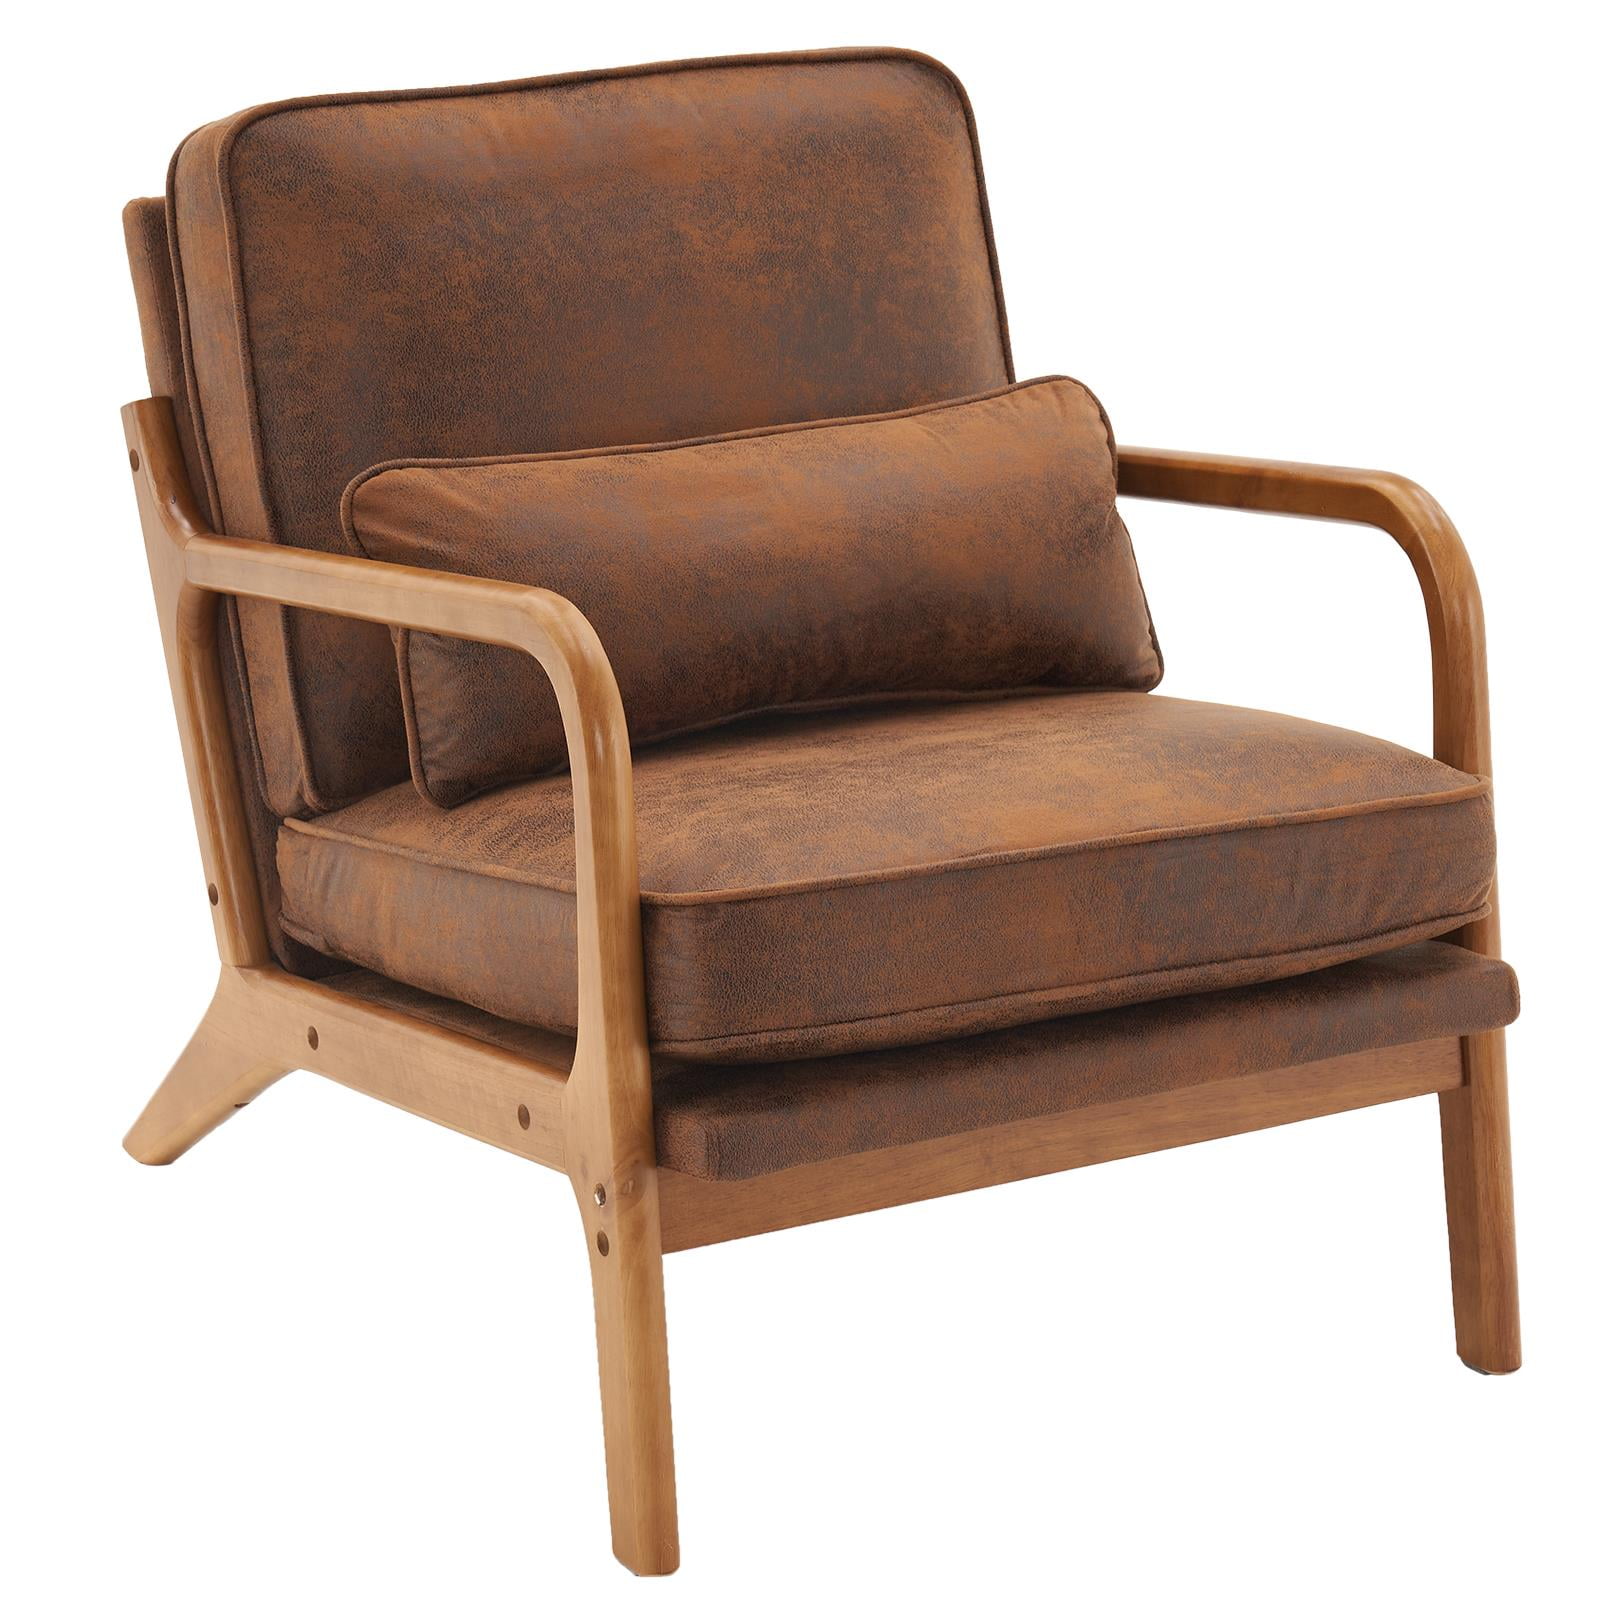 Frame Solid Accent Modern Brown Chair Upholstered Cloth with Bronzing UBesGoo Wood Reading Fabric Wood Club Chair